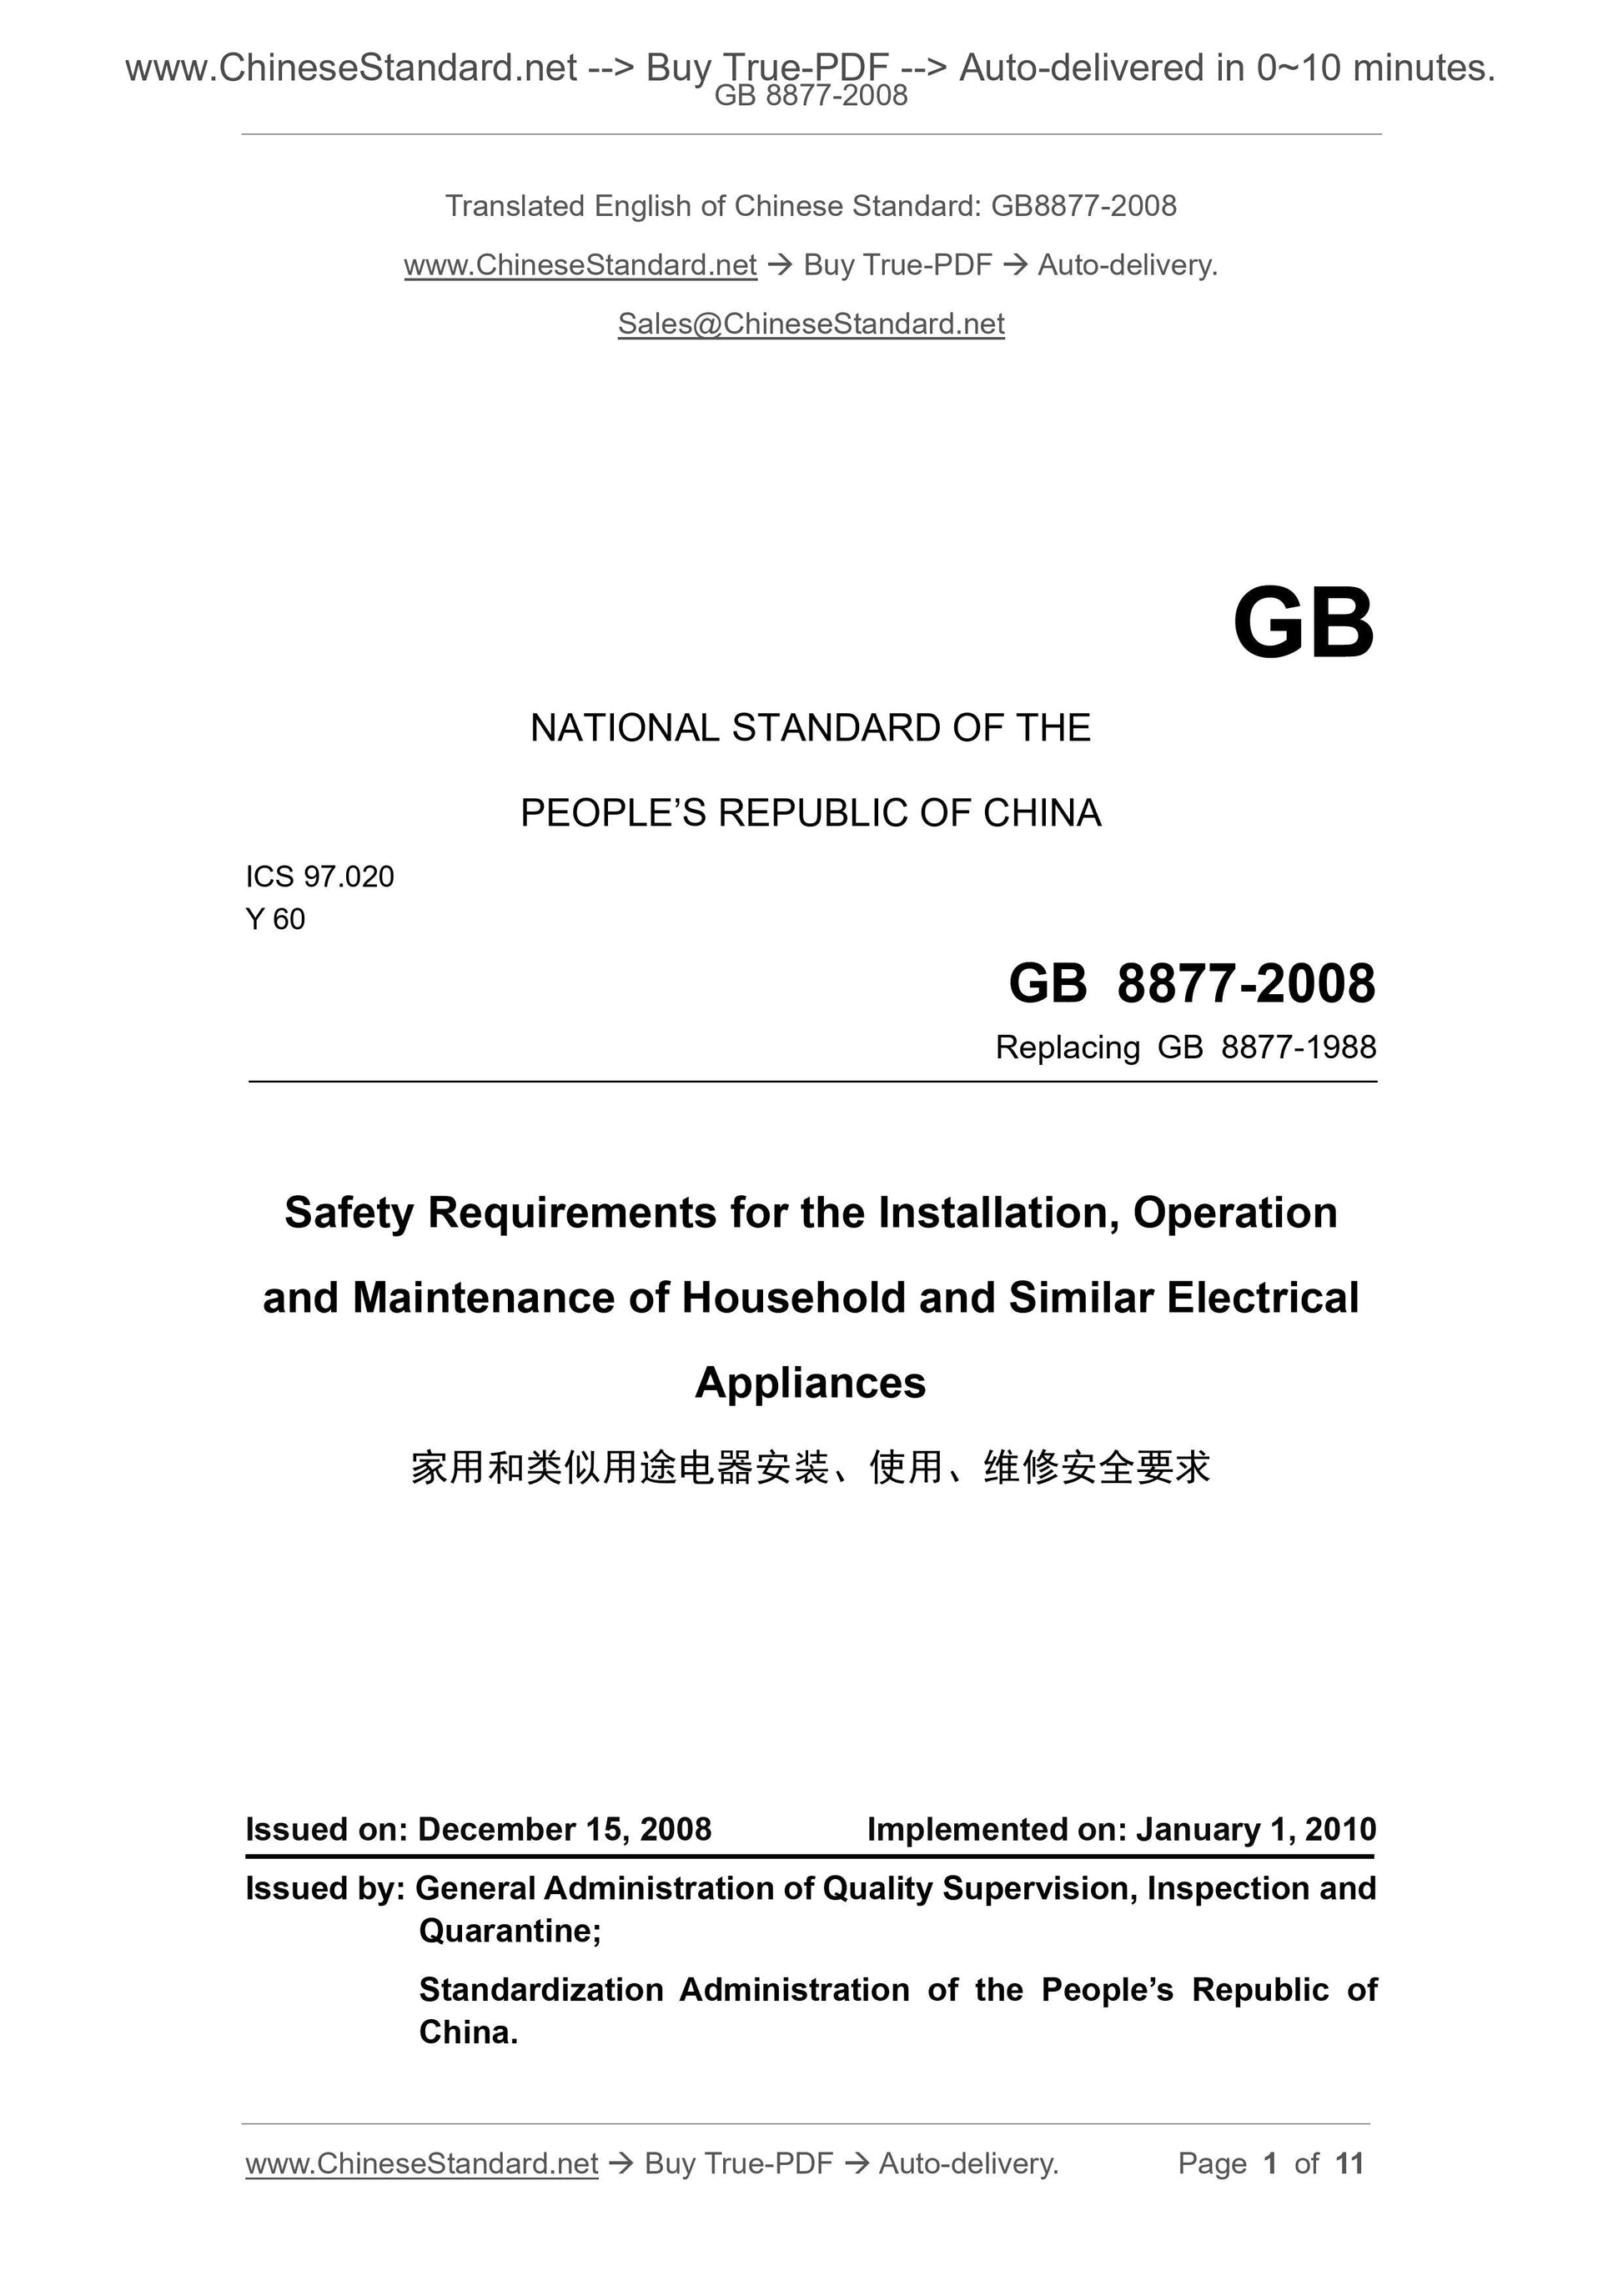 GB 8877-2008 Page 1